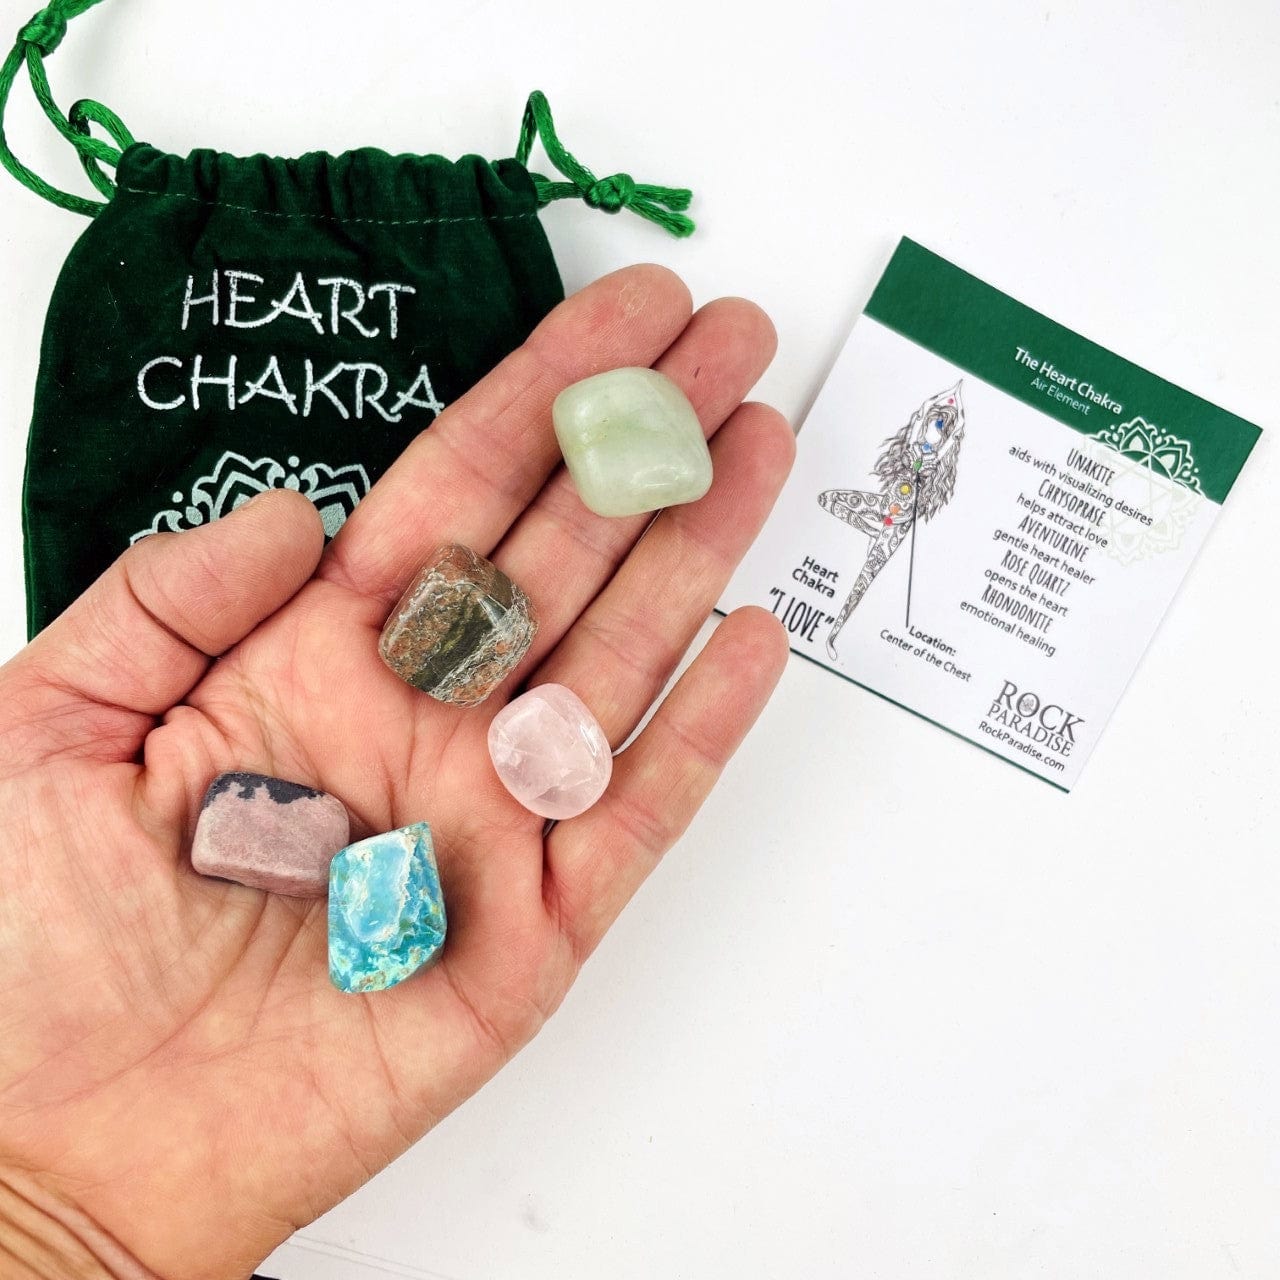 The Green Heart Chakra set opened up with the tumbled stones in a hand with the information card and pouch behind